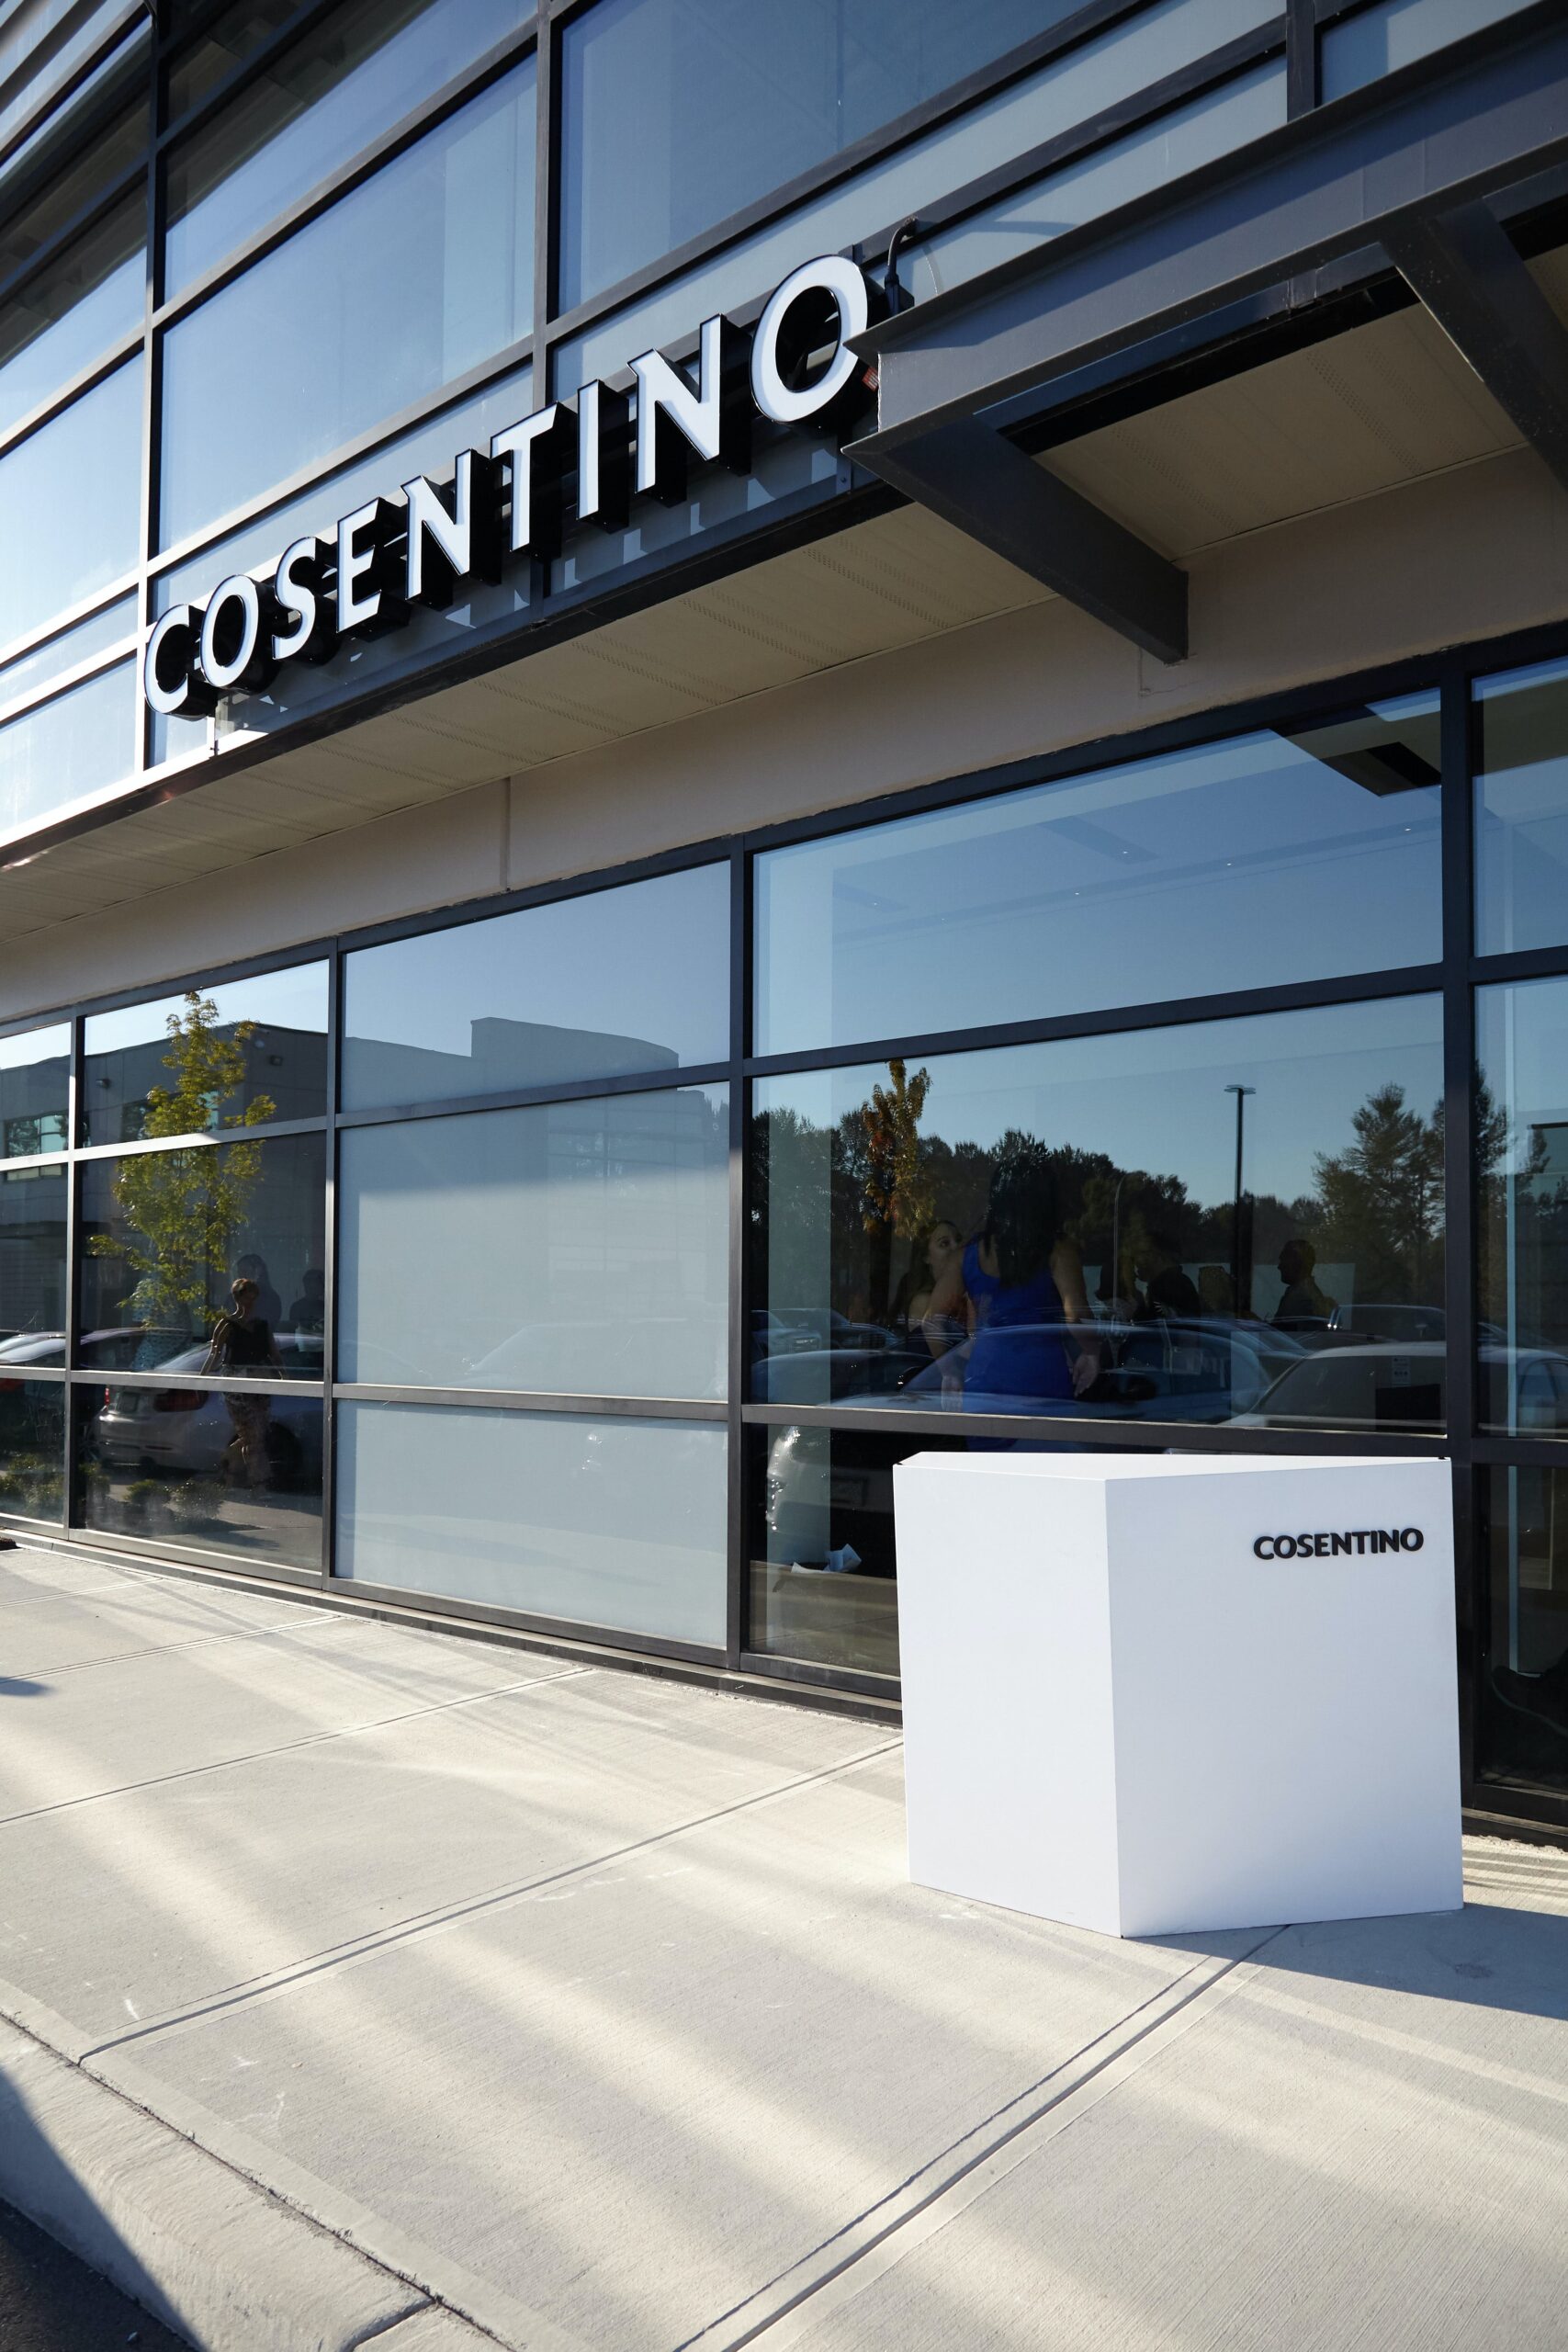 Image 36 of Cosentino Vancouver Center Opening 2018 4 1 scaled in Cosentino Officially Opens New Vancouver Centre Showroom - Cosentino